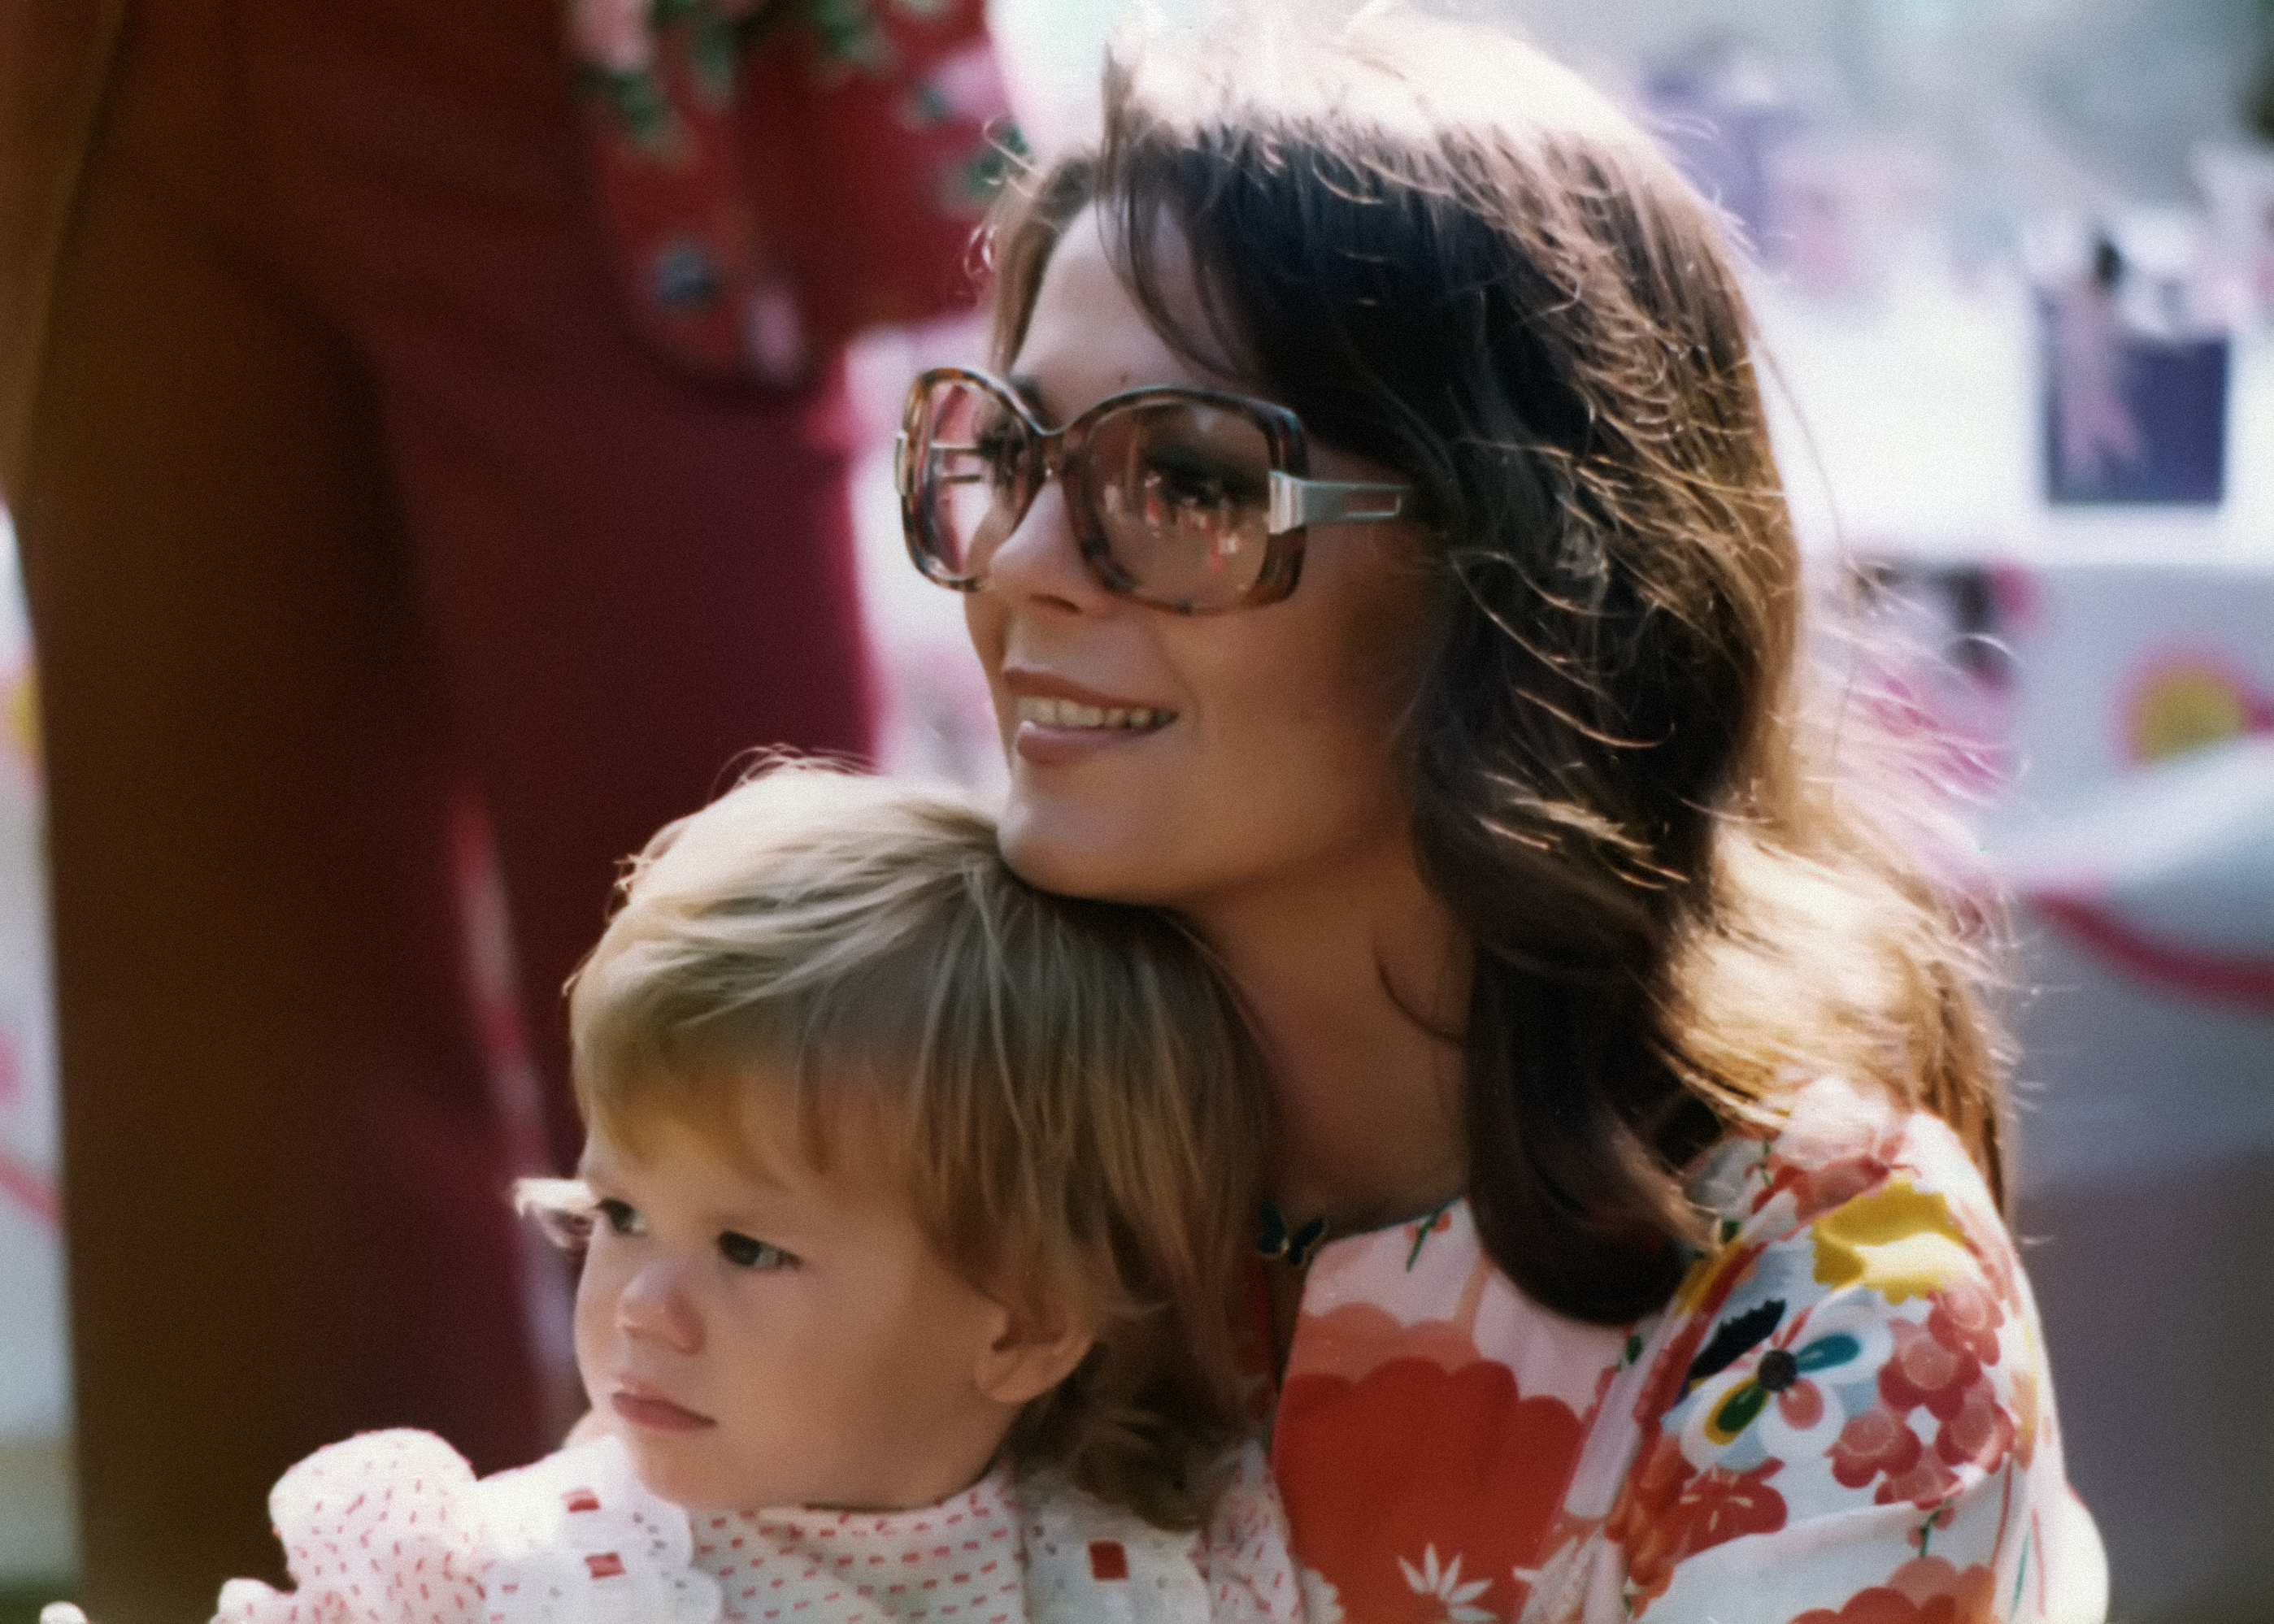 Wood and her daughter Courtney Wagner at her other daughter Natasha's birthday party in 1975 (Courtesy of HBO)